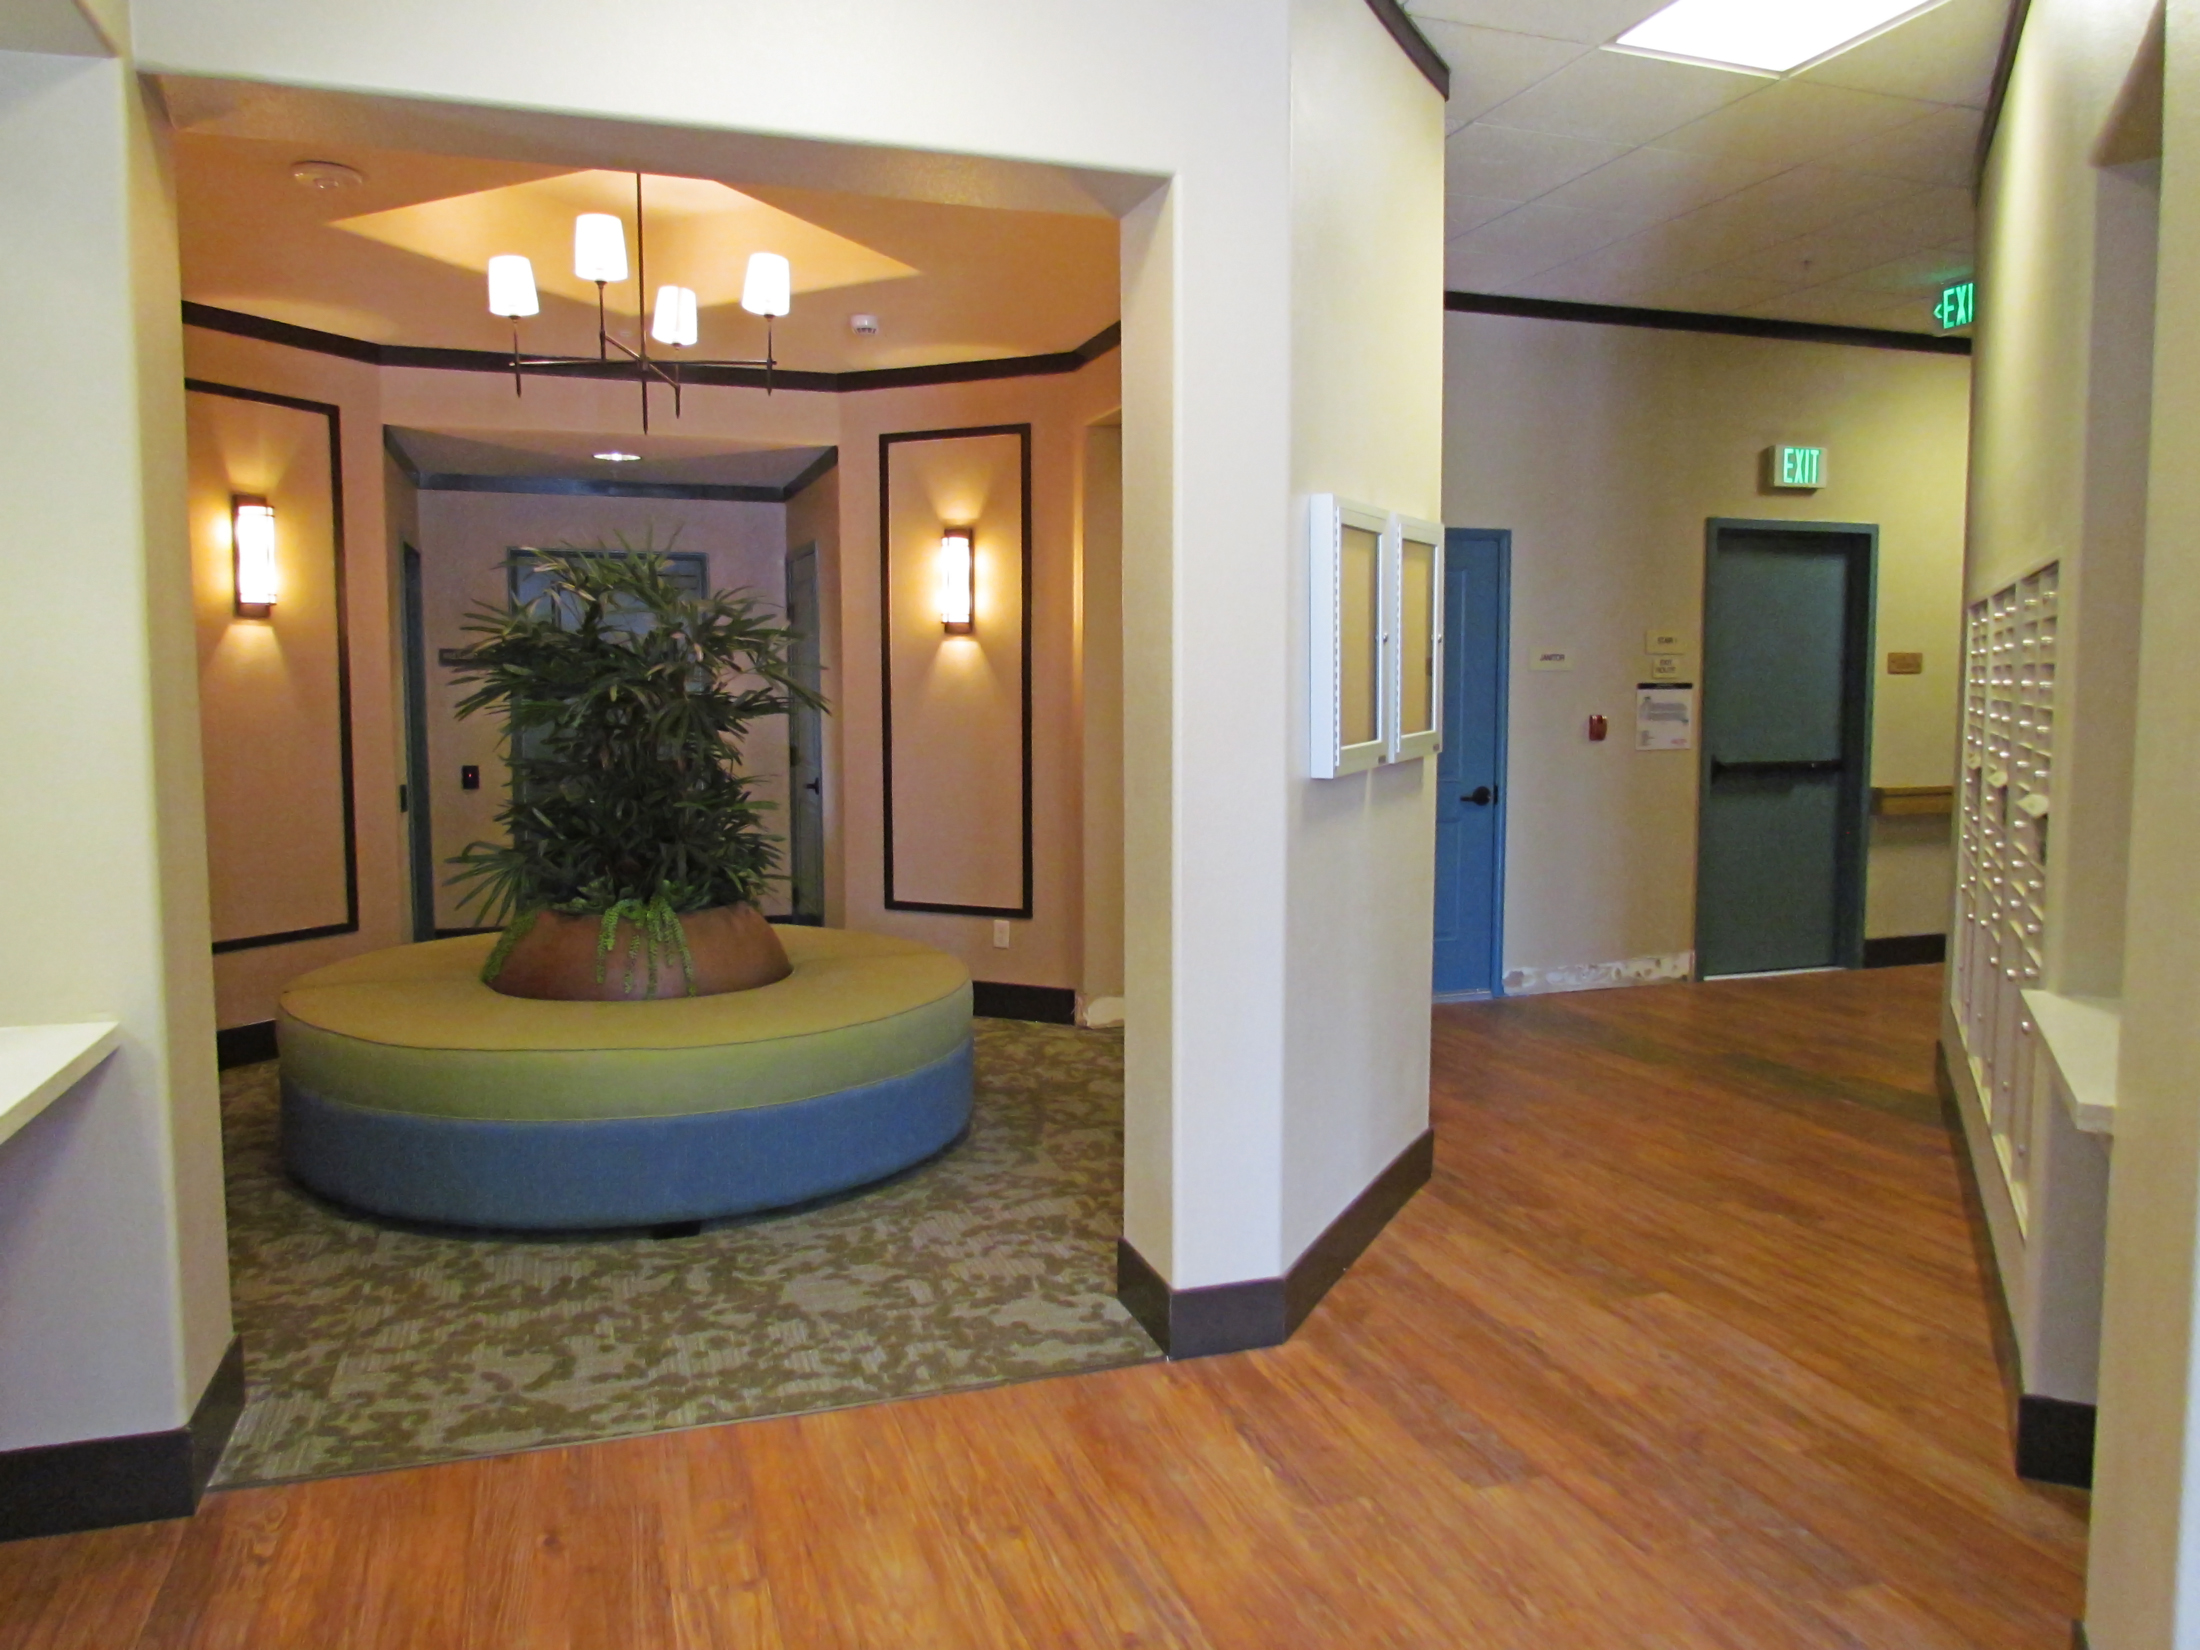 Interior view of the lobby and mail area at Osborne Street Apartments. A circular cushioned seat with a large plant in the center of it in the lobby area and the mail boxes on a wall to the side of the lobby